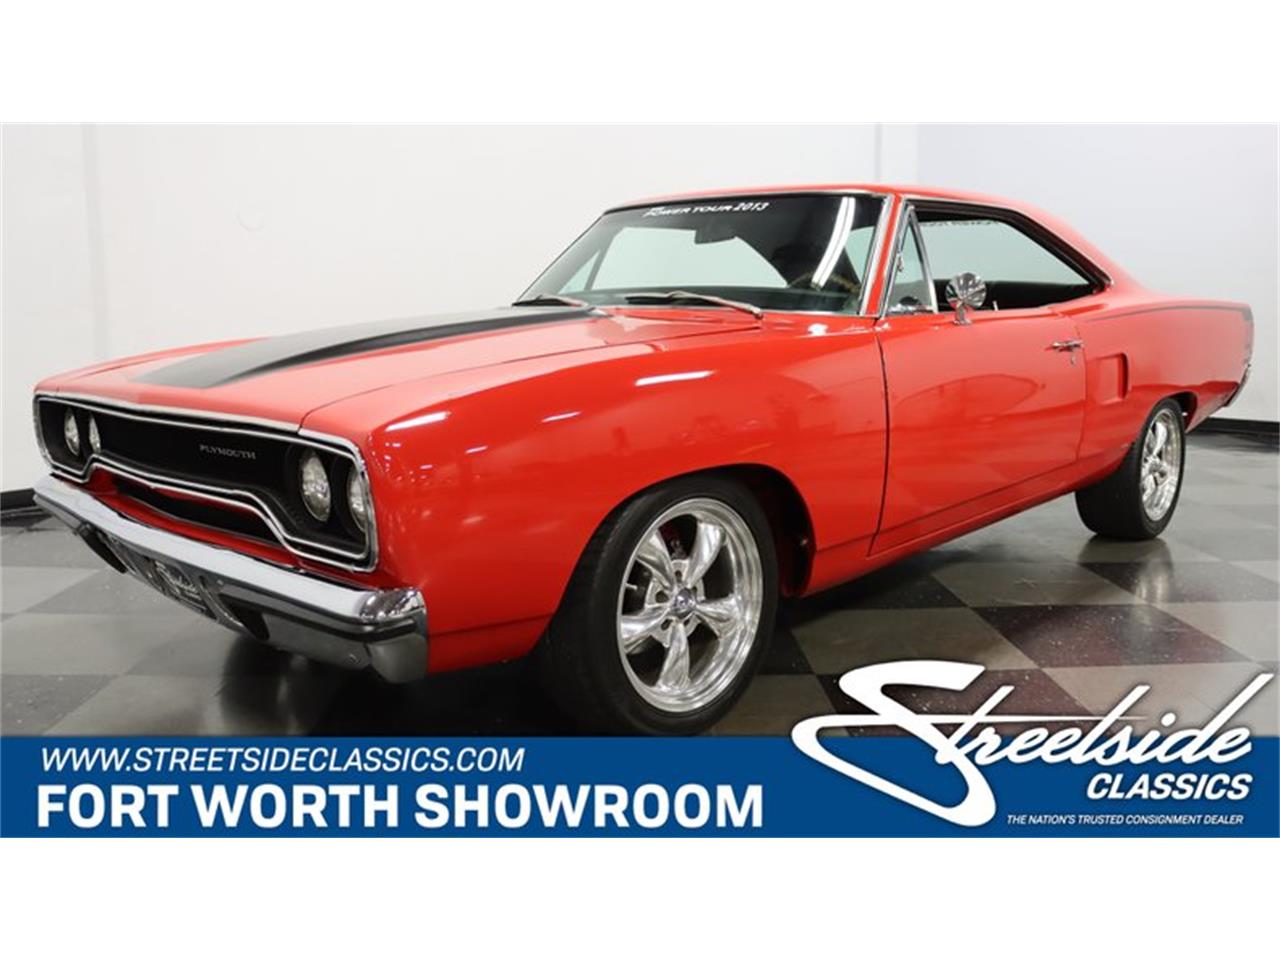 1970 Plymouth Road Runner for sale in Fort Worth, TX